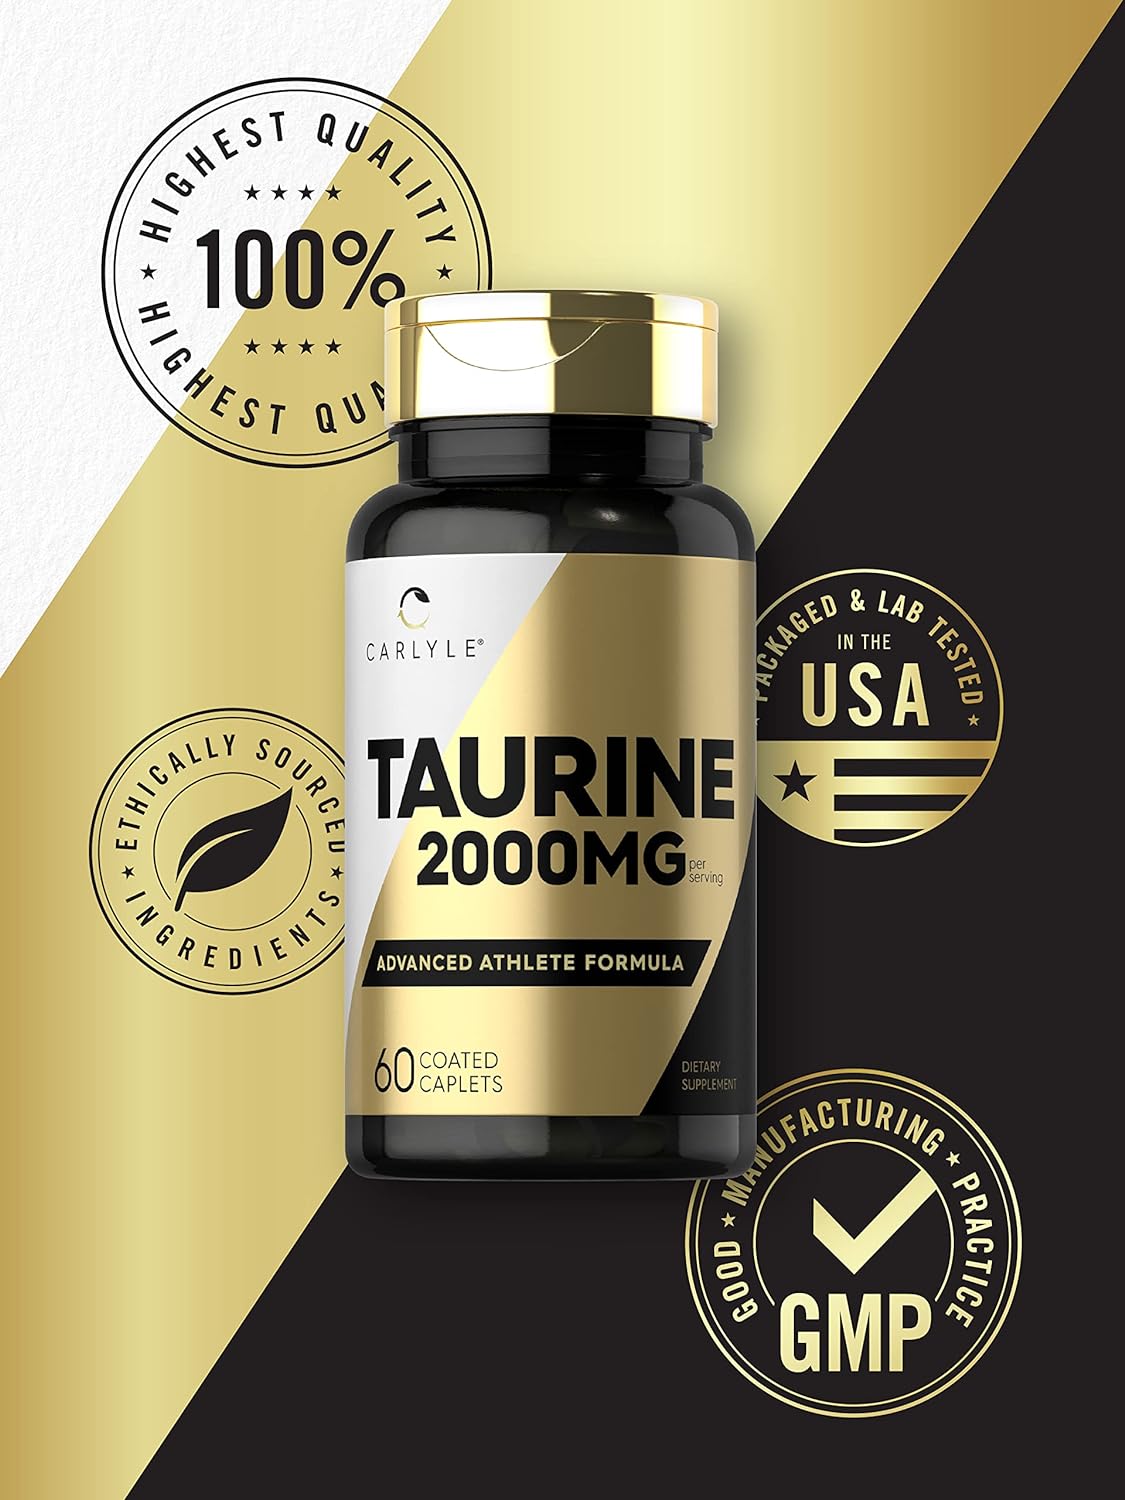 Carlyle Taurine Supplement | 2000mg | 60 Caplets | Vegetarian, Non-GMO, and Gluten Free | Advanced Athlete Formula : Health & Household